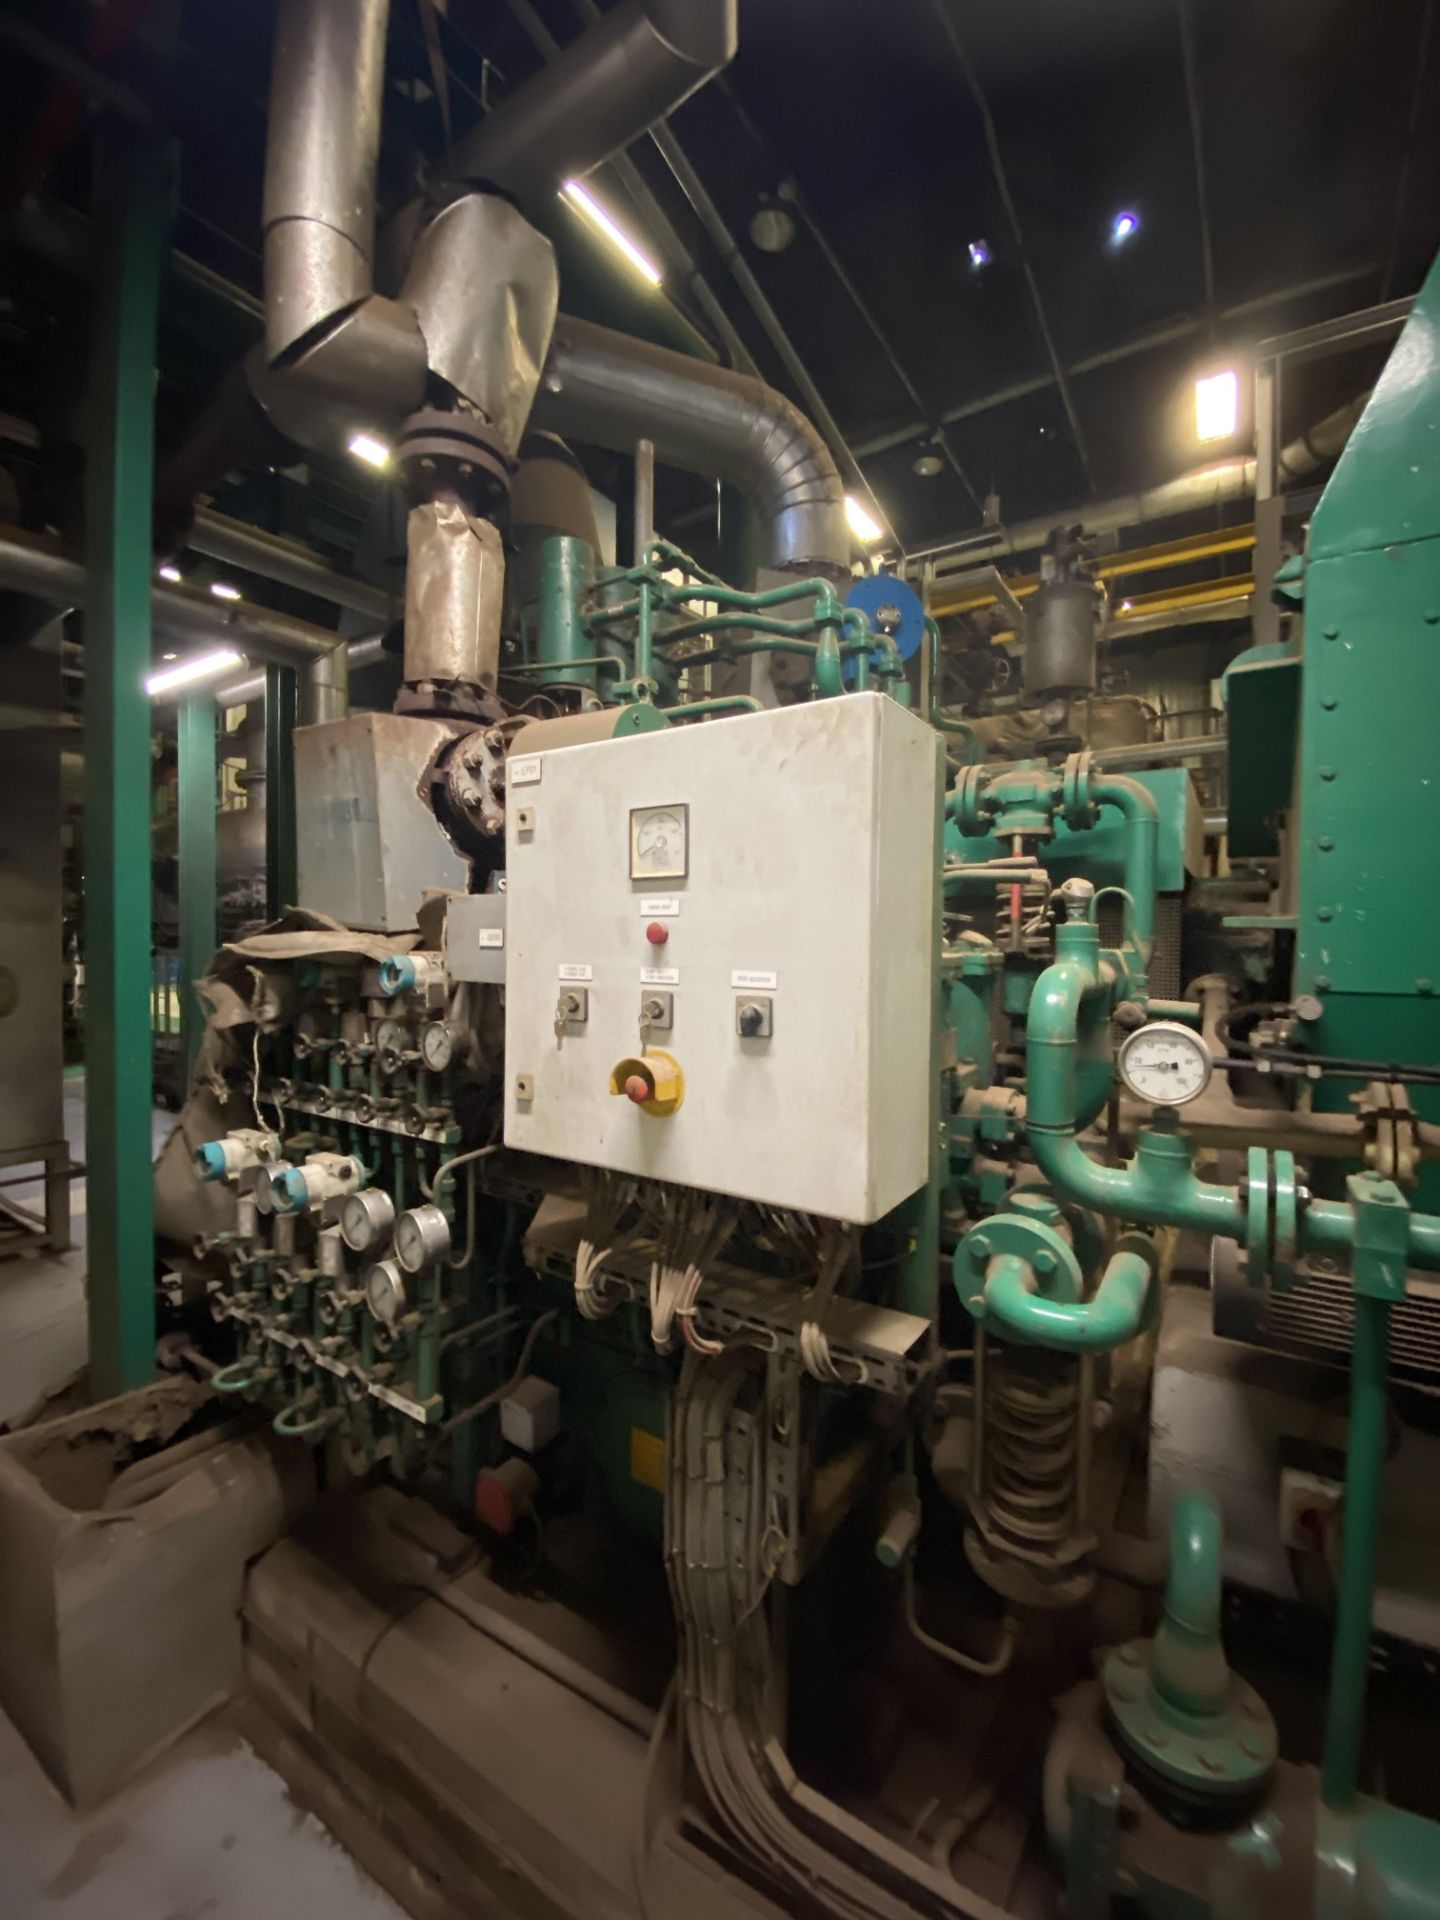 Siemens TWIN-CA36 STEAM TURBINE, serial no. 4.736.023, year of manufacture 2008, output 3119kW ( - Image 7 of 9